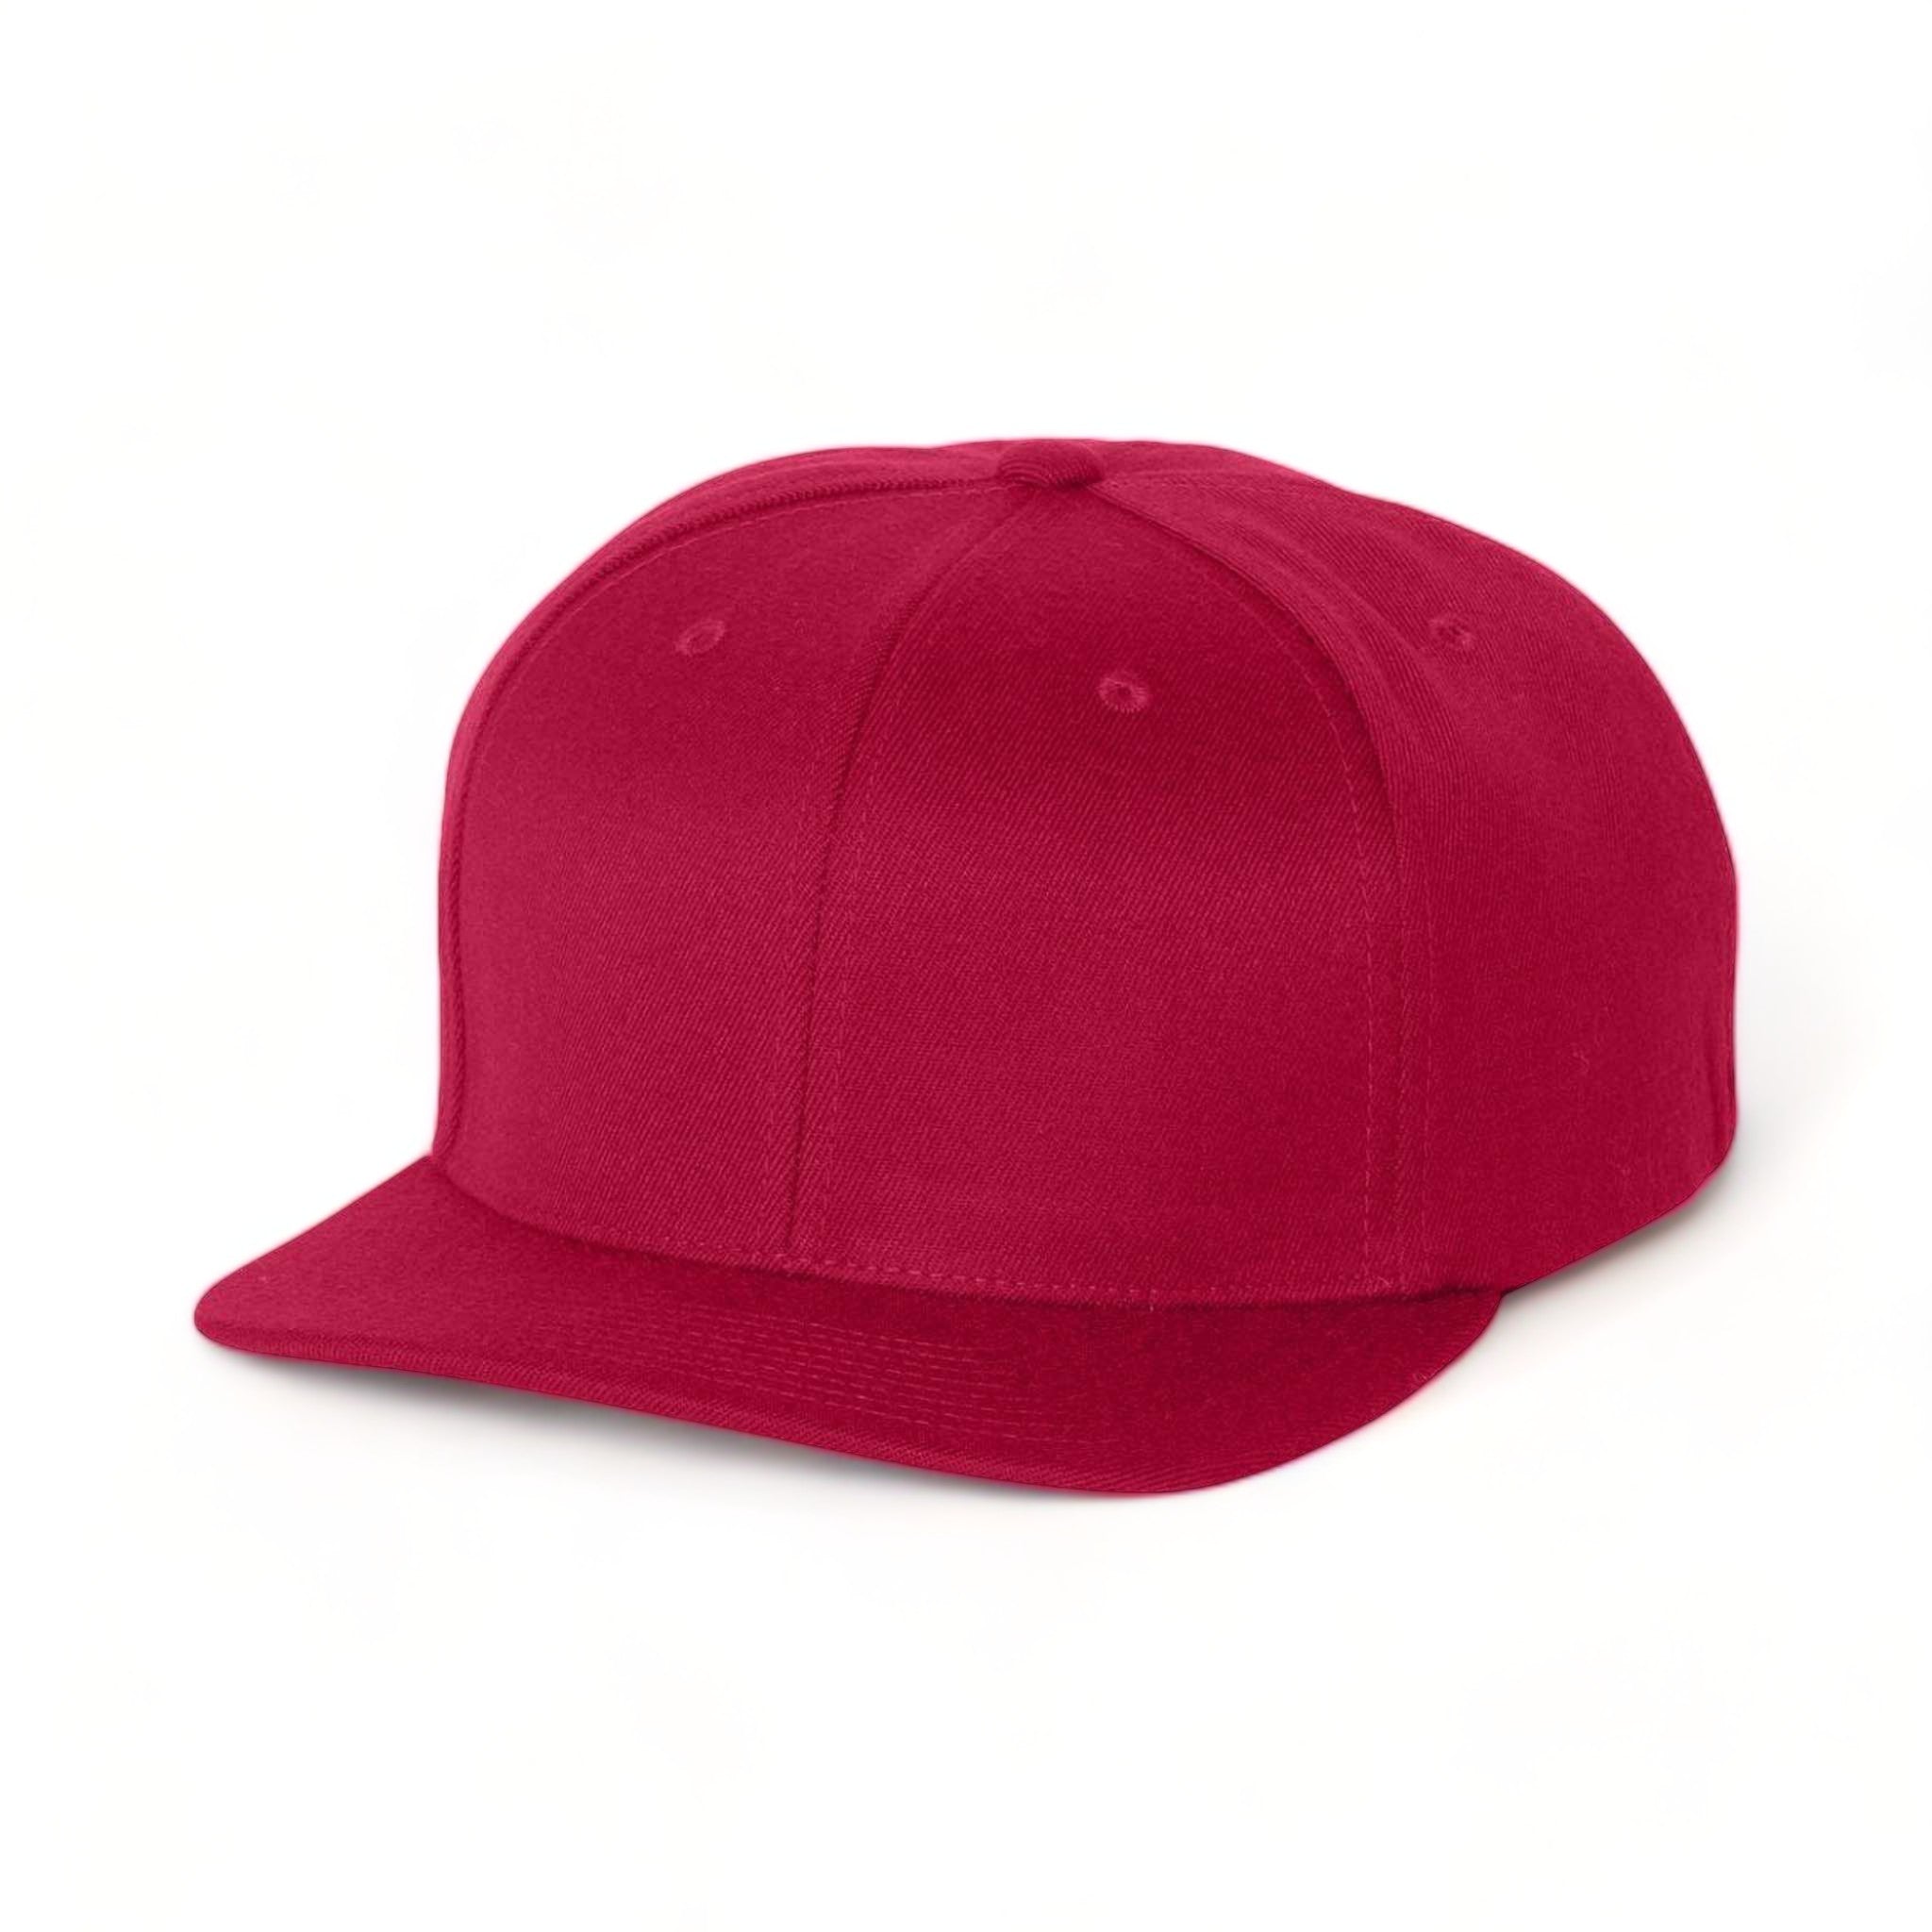 Front view of Flexfit 110F custom hat in red